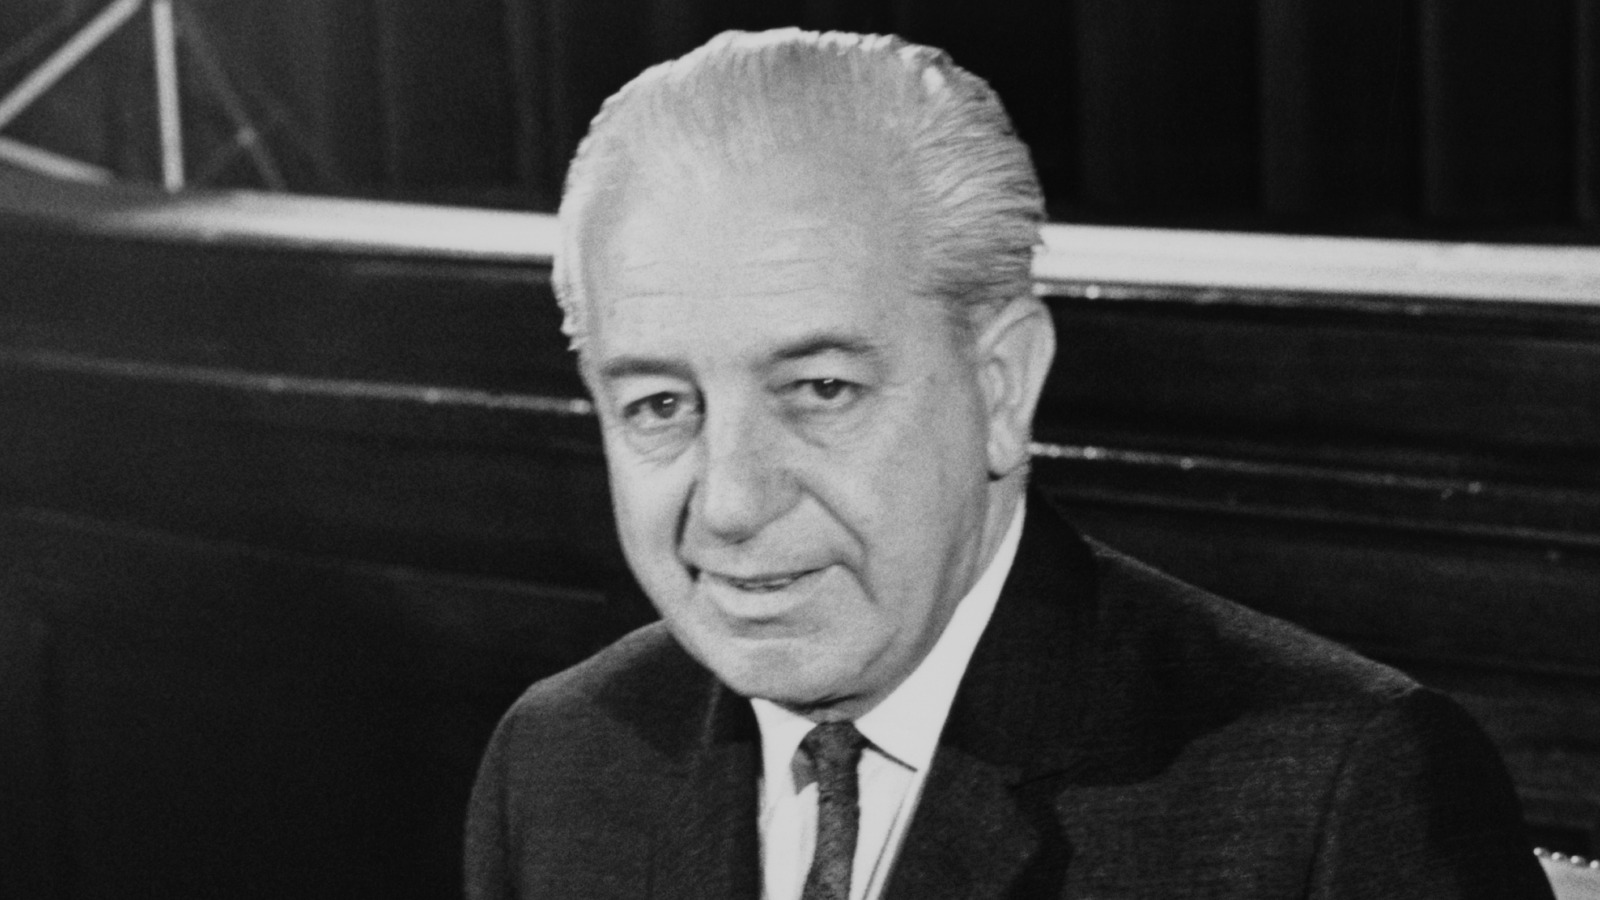 The Mysterious Disappearance Of Australian Prime Minister Harold Holt